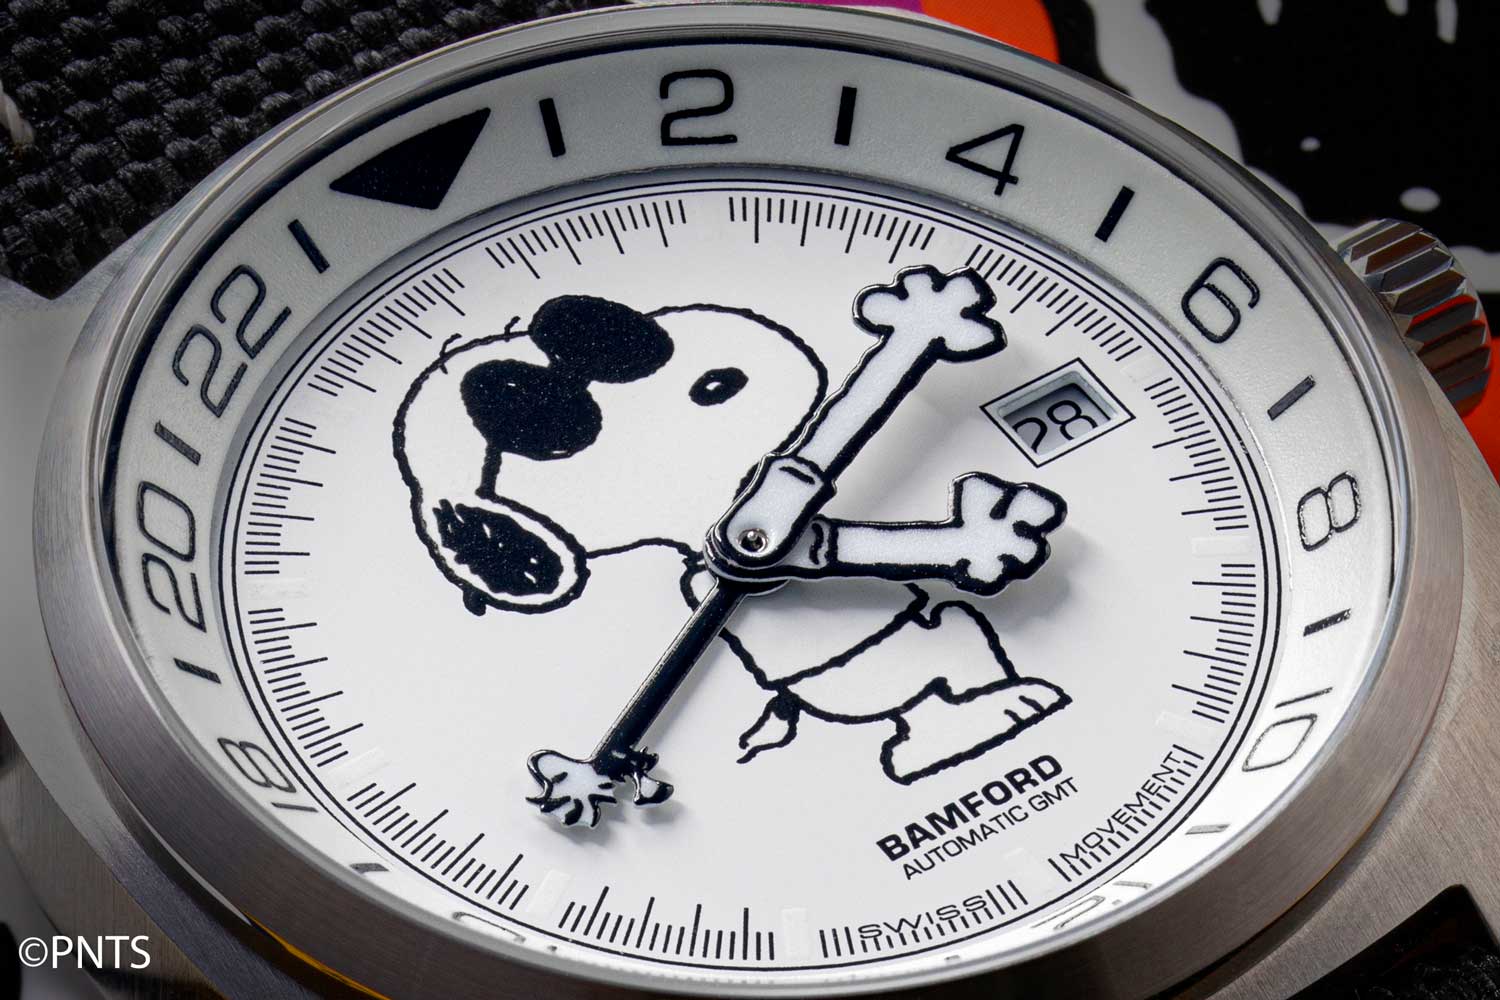 The dial features a prominent image of Snoopy, whose four-toed paws form the hour and minute hands for the main time display. (©Revolution)